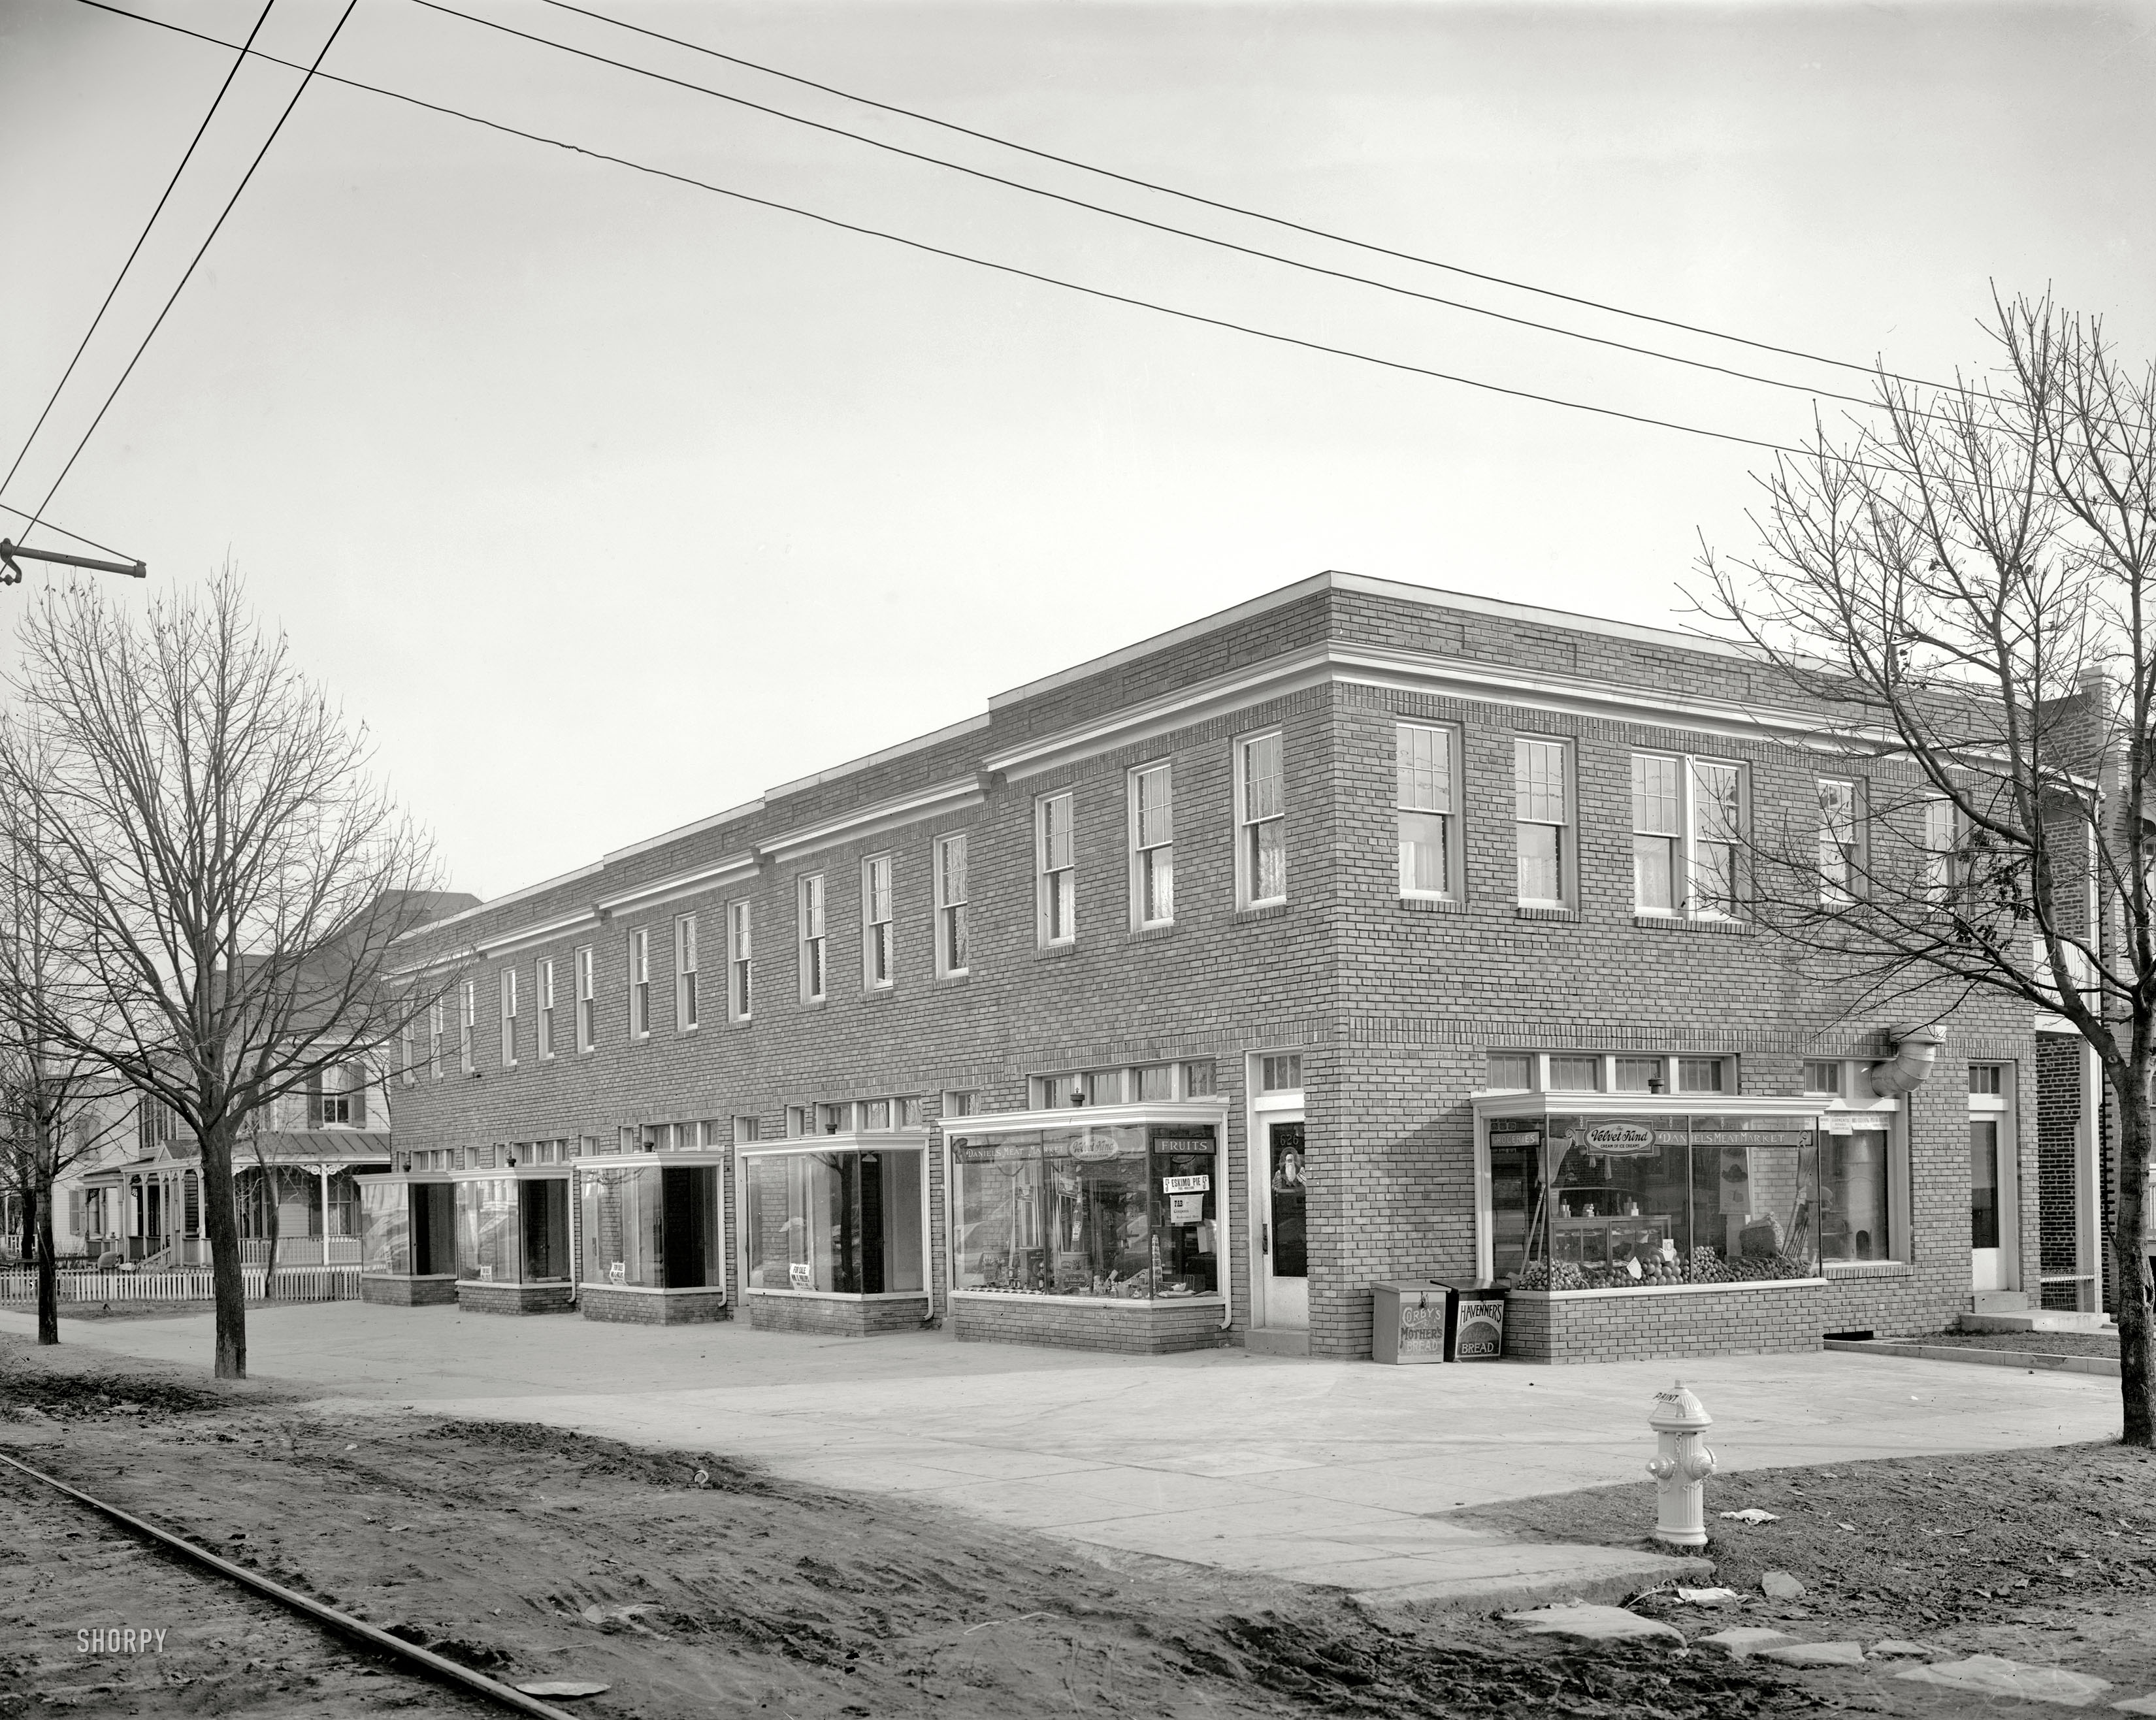 Washington, D.C., circa 1923. "Seventh and Kennedy." Note the bakery-delivery bread boxes. National Photo Company Collection glass negative. View full size.